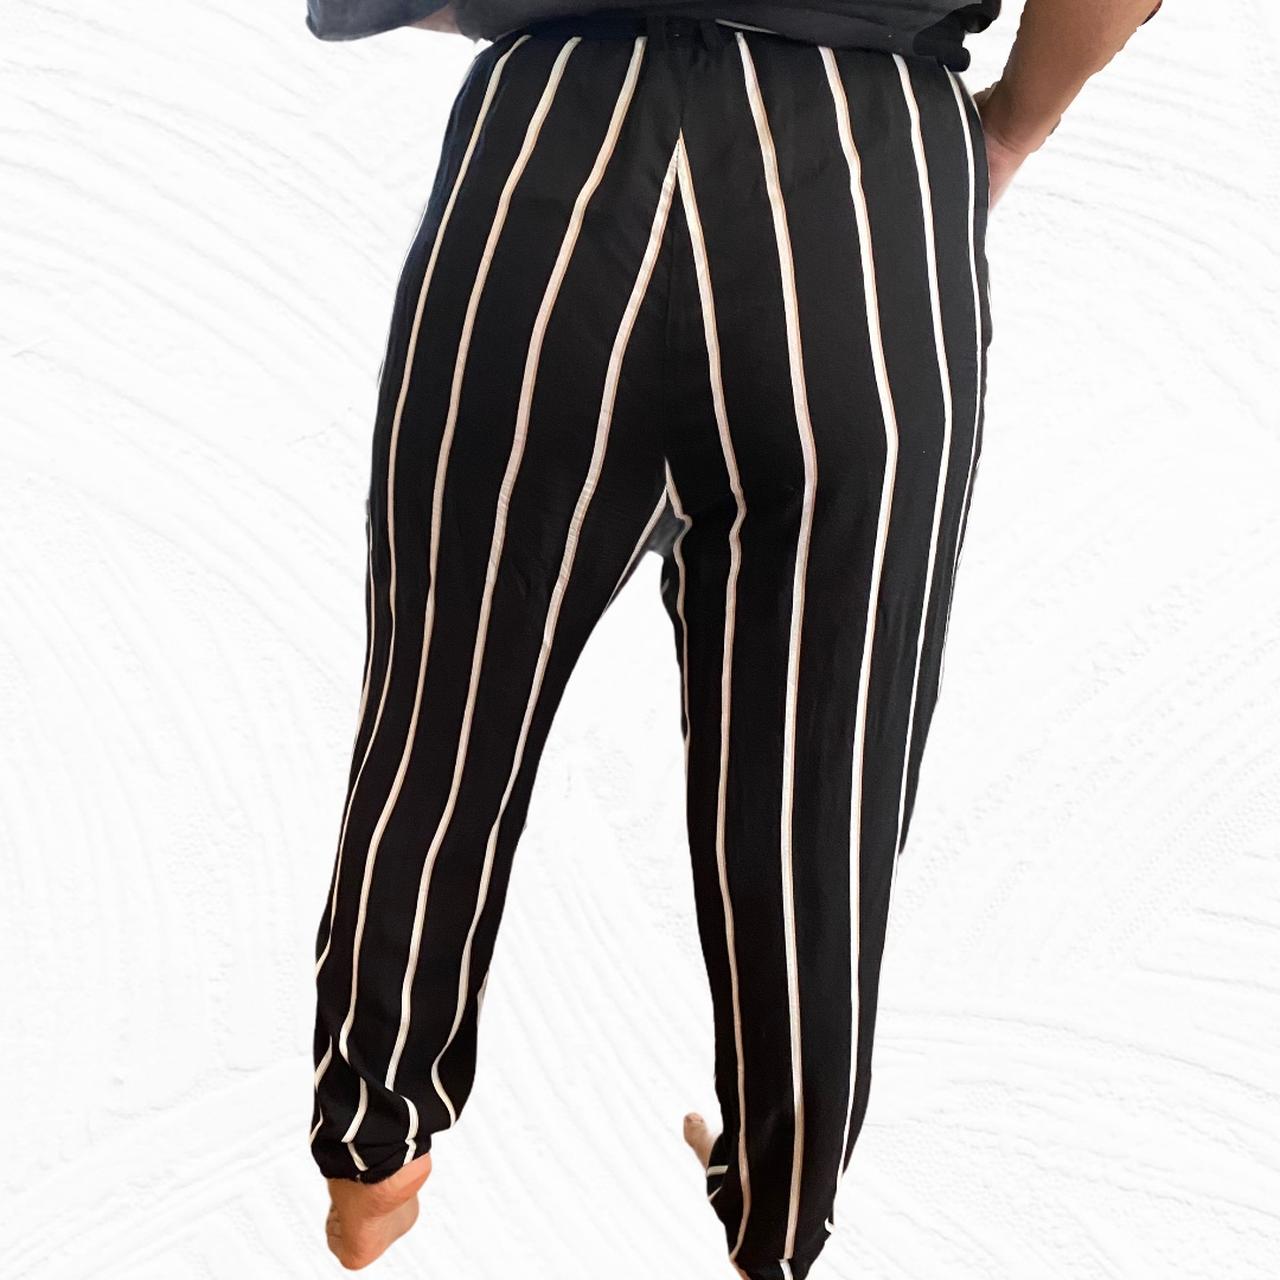 I Saw It First Women's Black and White Trousers (2)